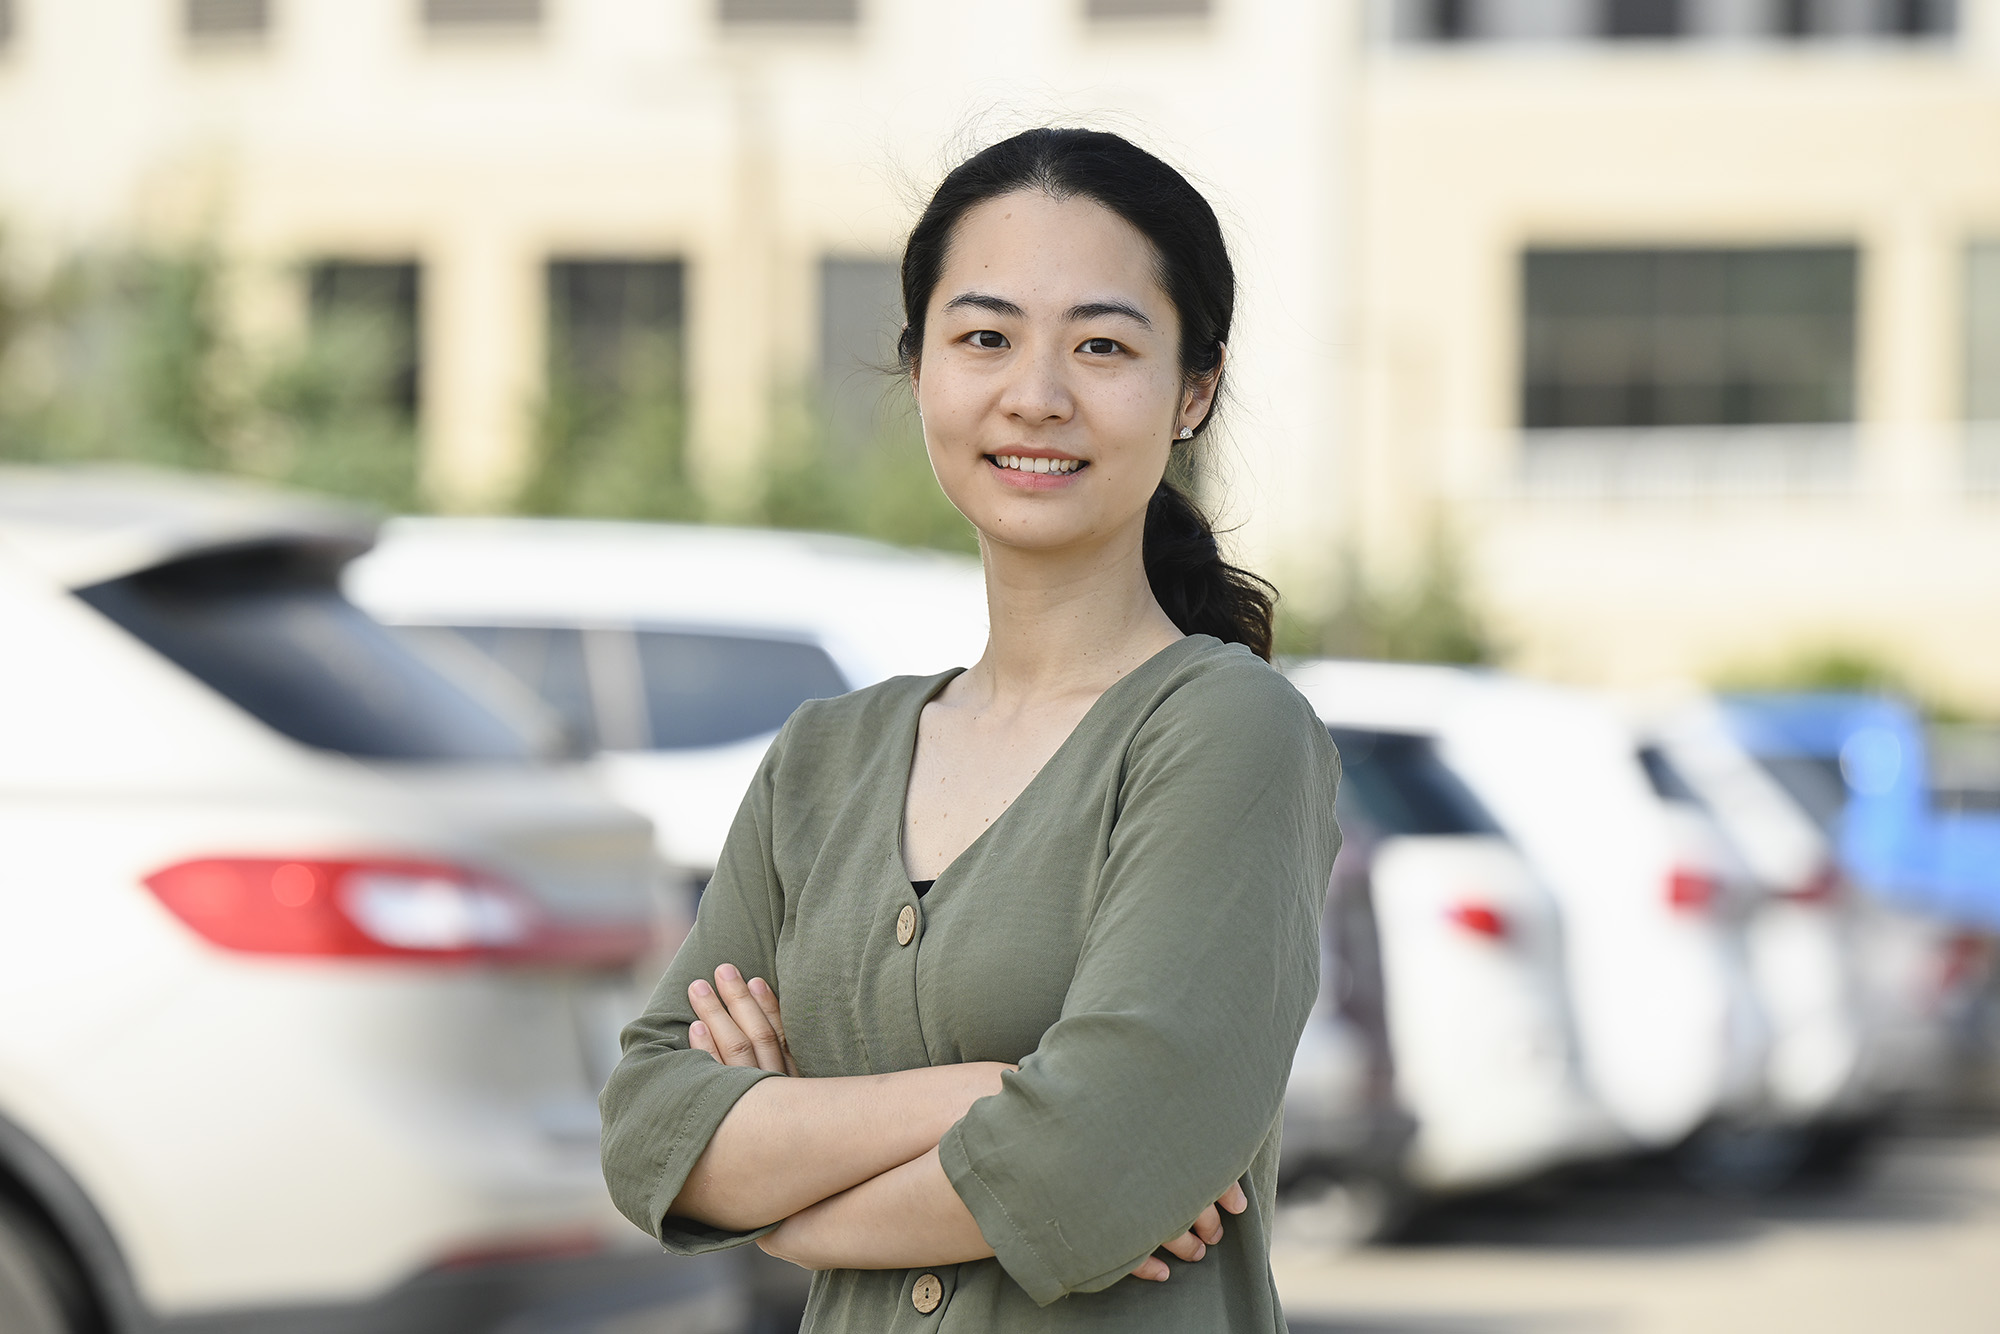 Dr. Yili (Kelly) Tang received federal funding to delve into electric vehicle infrastructure to help support a net-zero transportation sector. (Photo by Trevor Hopkin)